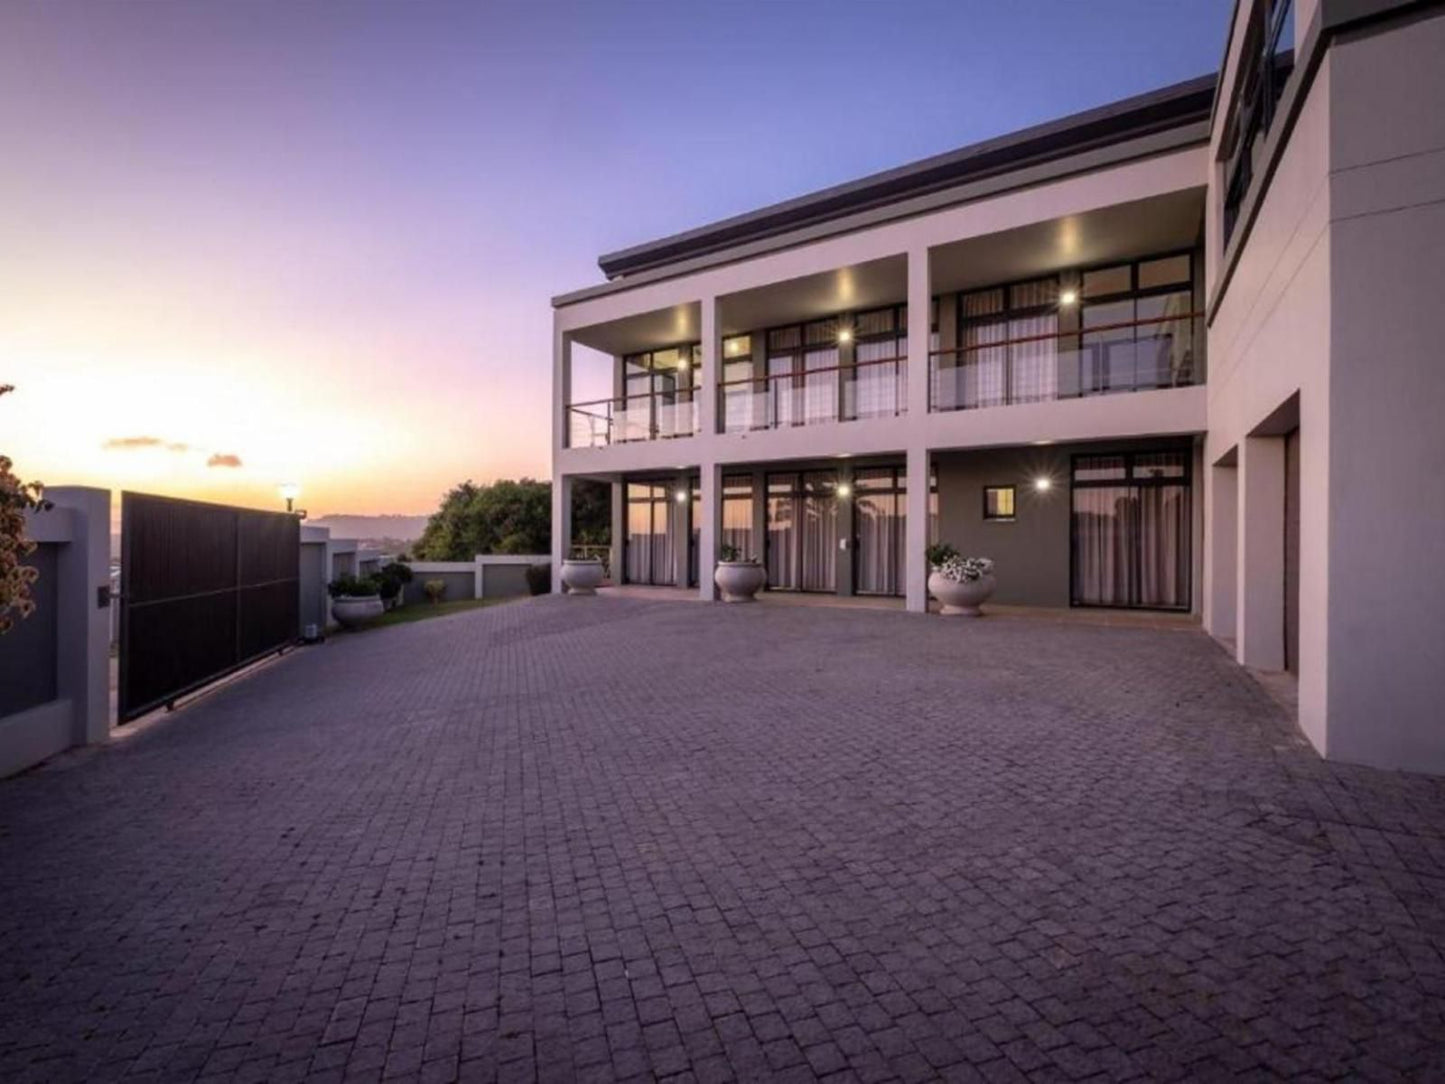 Anchor S Haven Hersham Great Brak River Western Cape South Africa House, Building, Architecture